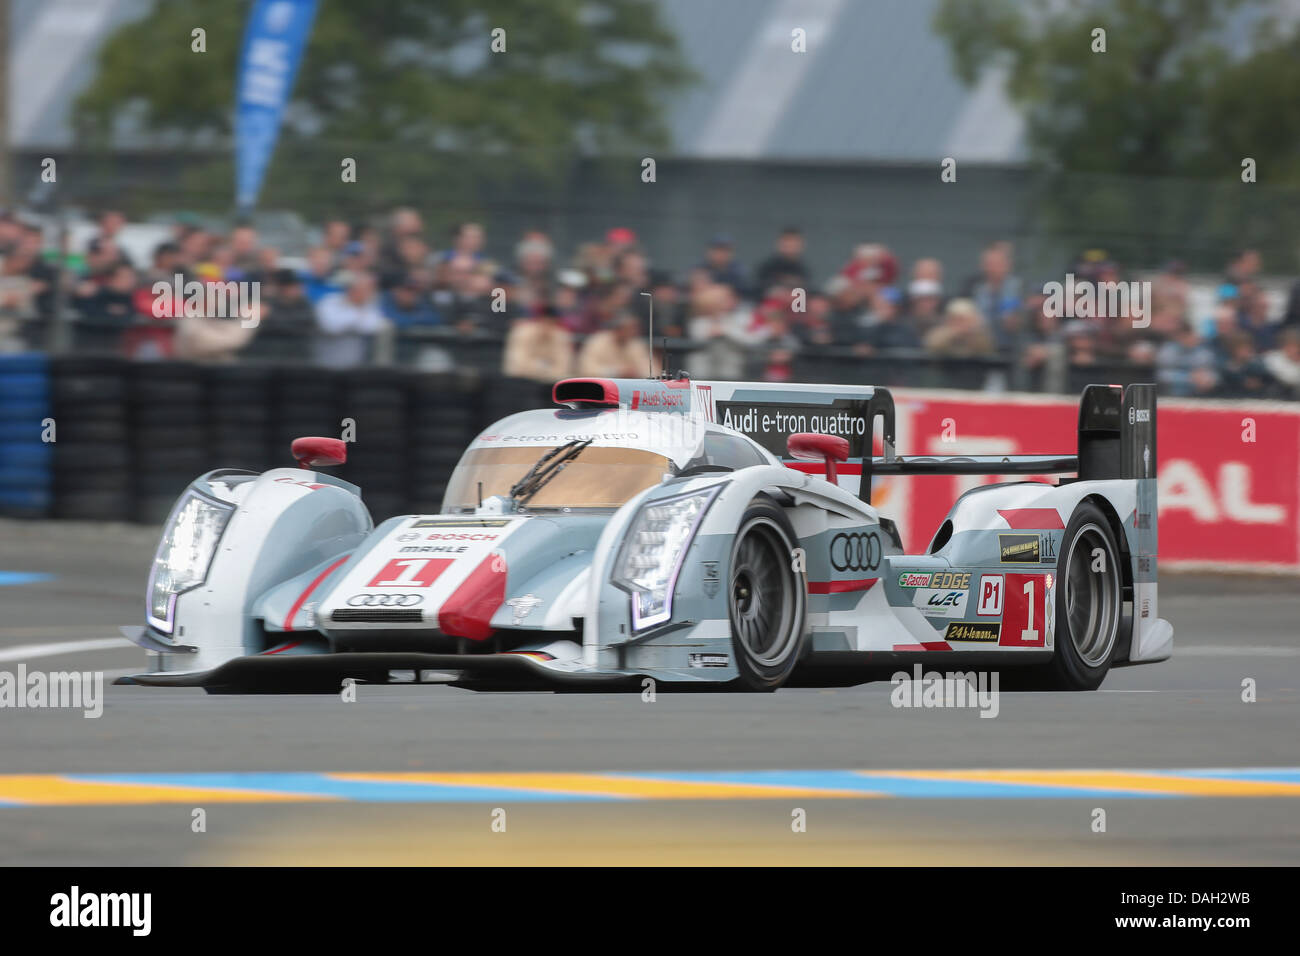 LE MANS, FRANCE - JUNE 23 Audi #1 competes in the 24 hours of Le Mans 2013 Stock Photo